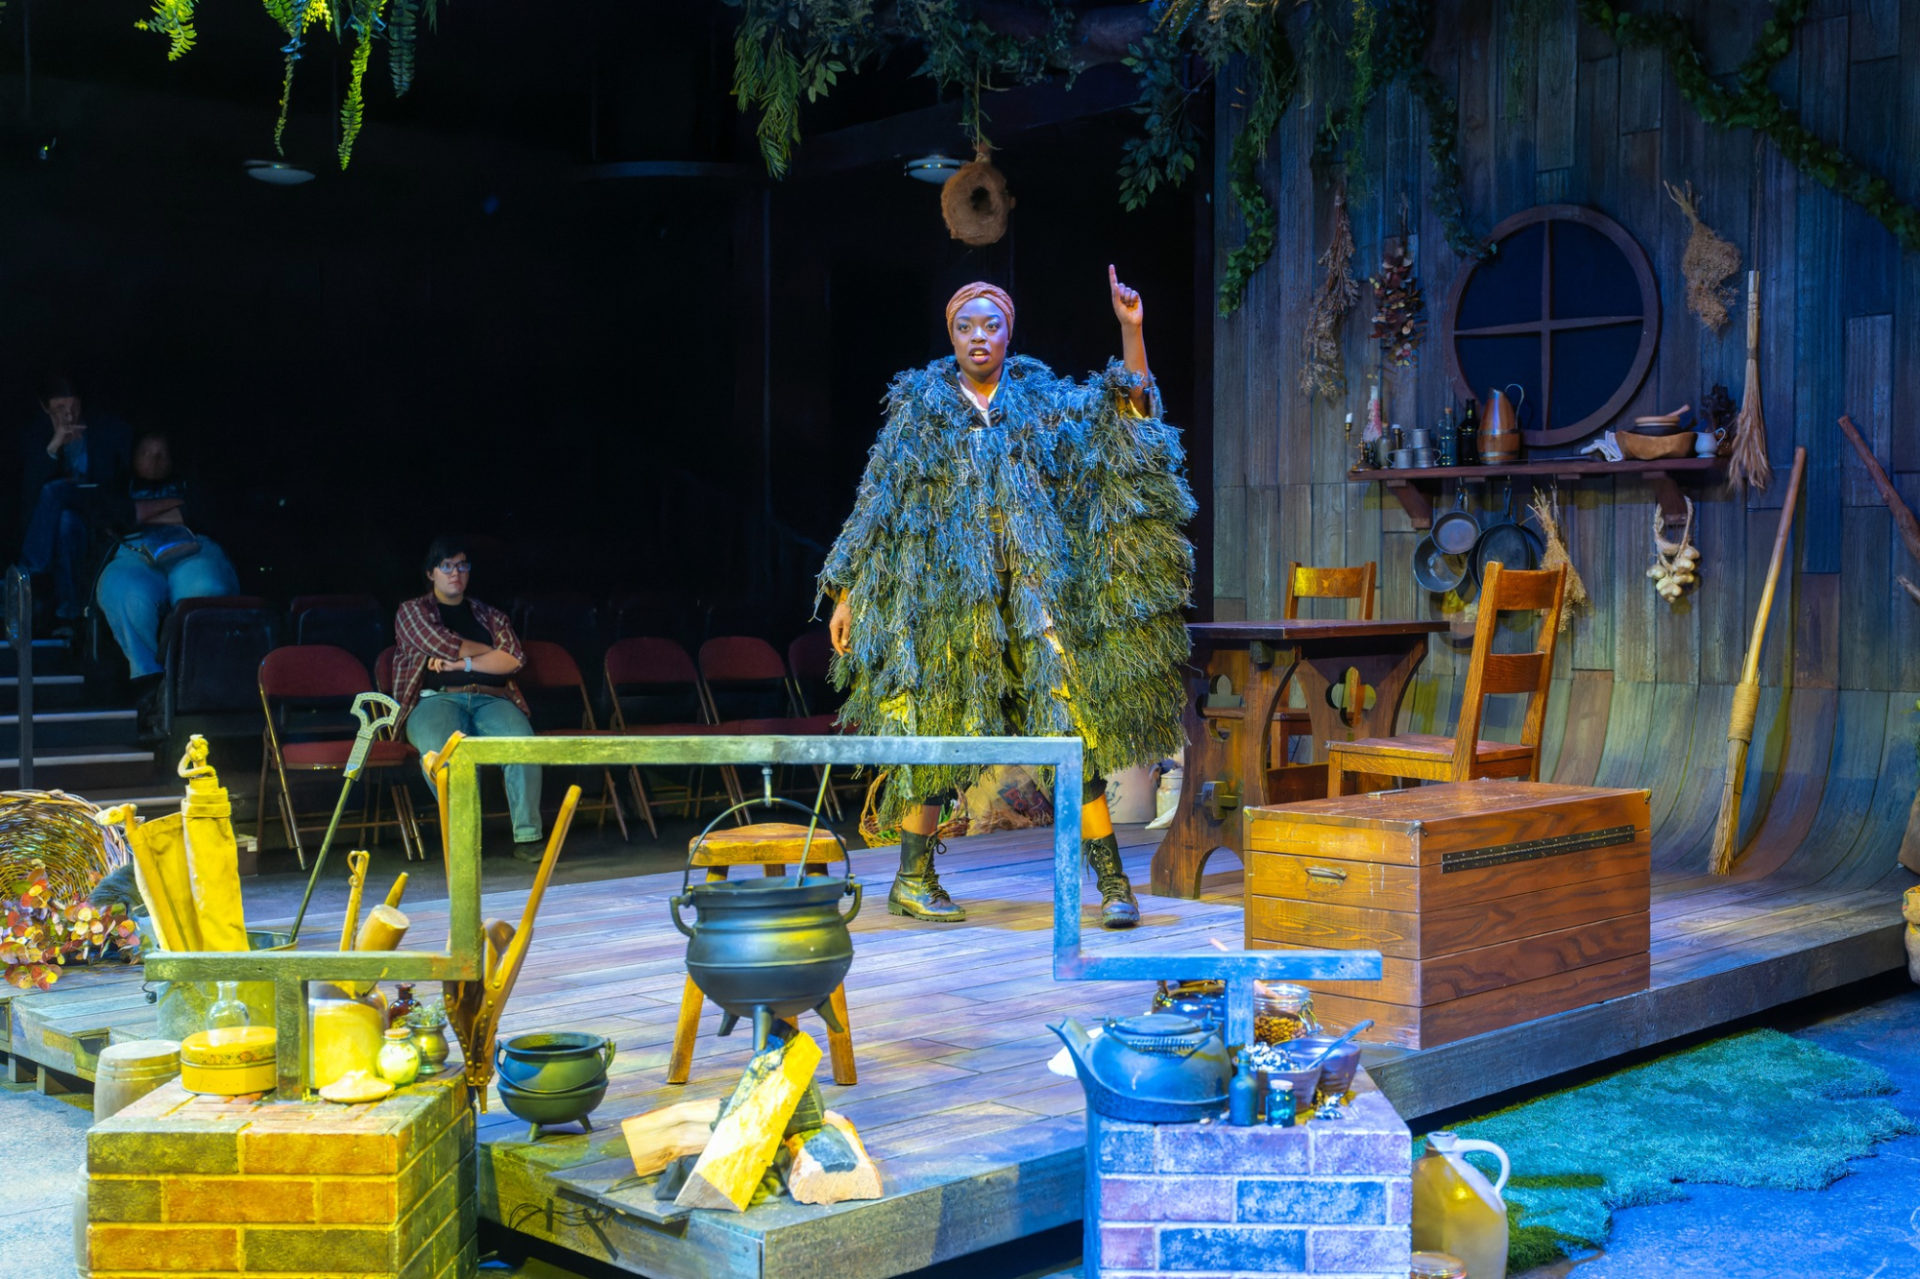 Y’vonne Rose Smith as Elizabeth in Illinois Theatre's production of Witch at Krannert Center for the Performing Arts. A black woman wears a green, fringe-covered coat and green boots. She is standing on a stage meant to resemble a 17th century house, with a cauldron over a pile of wood, a table and chairs, and a few cooking supplies.